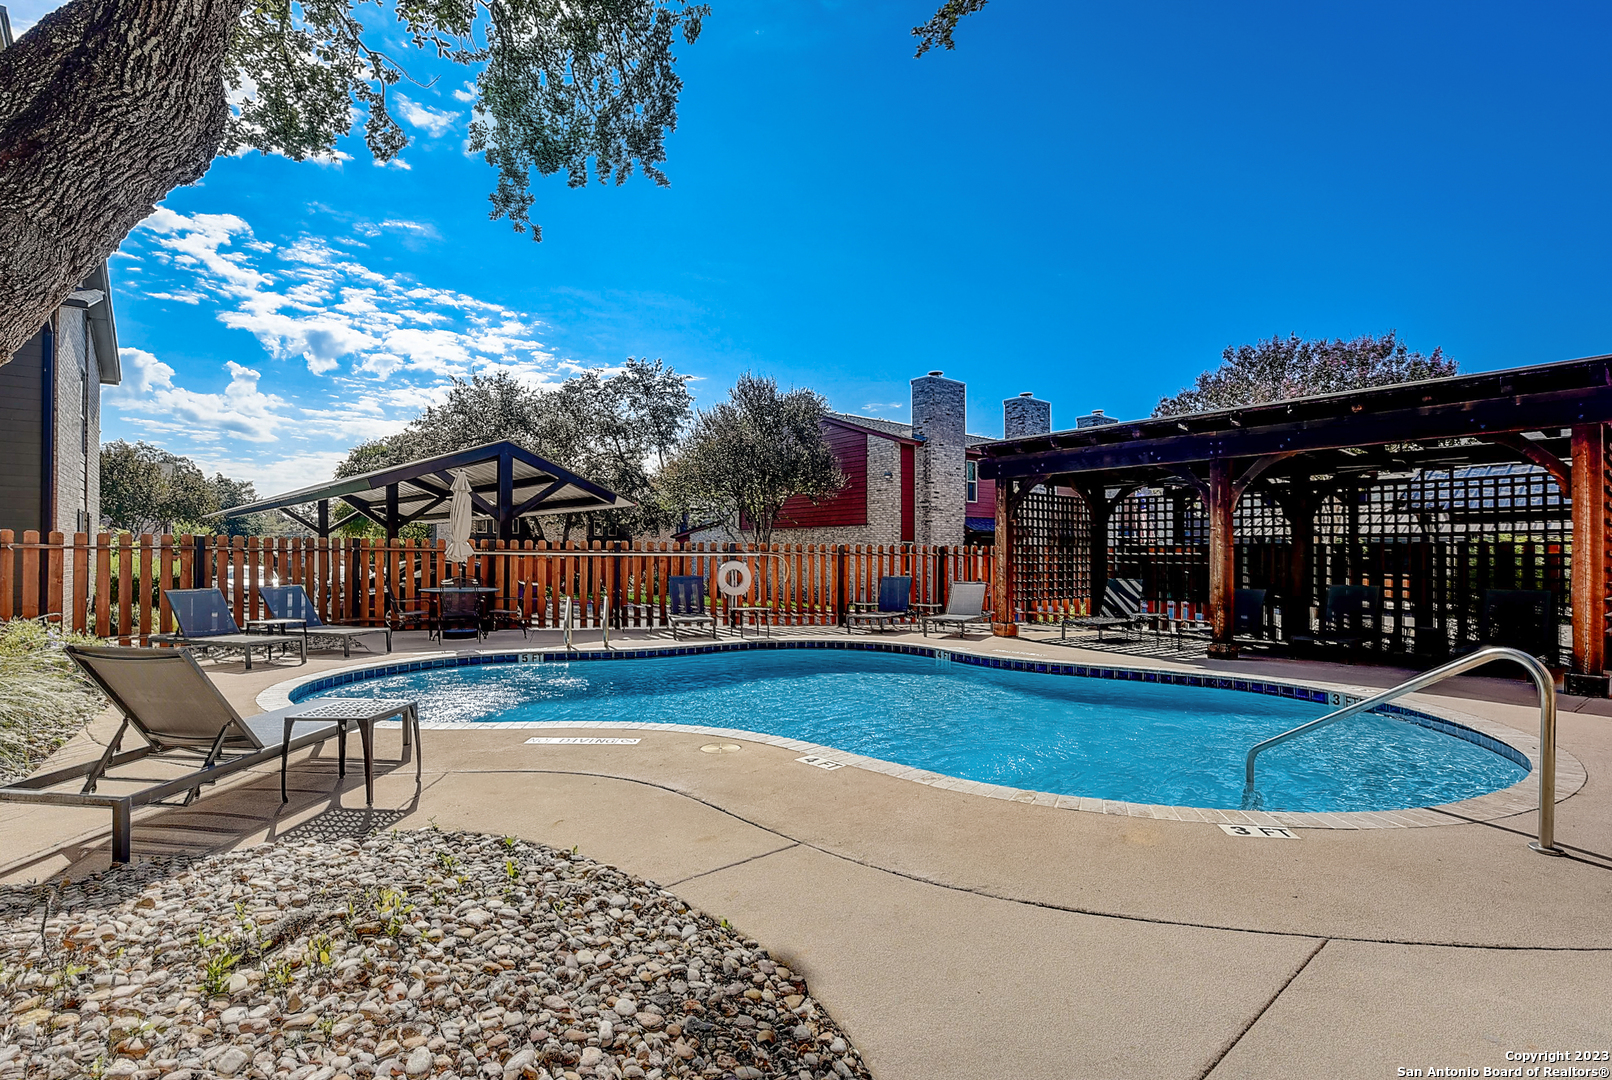 Photo of 2718 Old Field Dr in San Antonio, TX